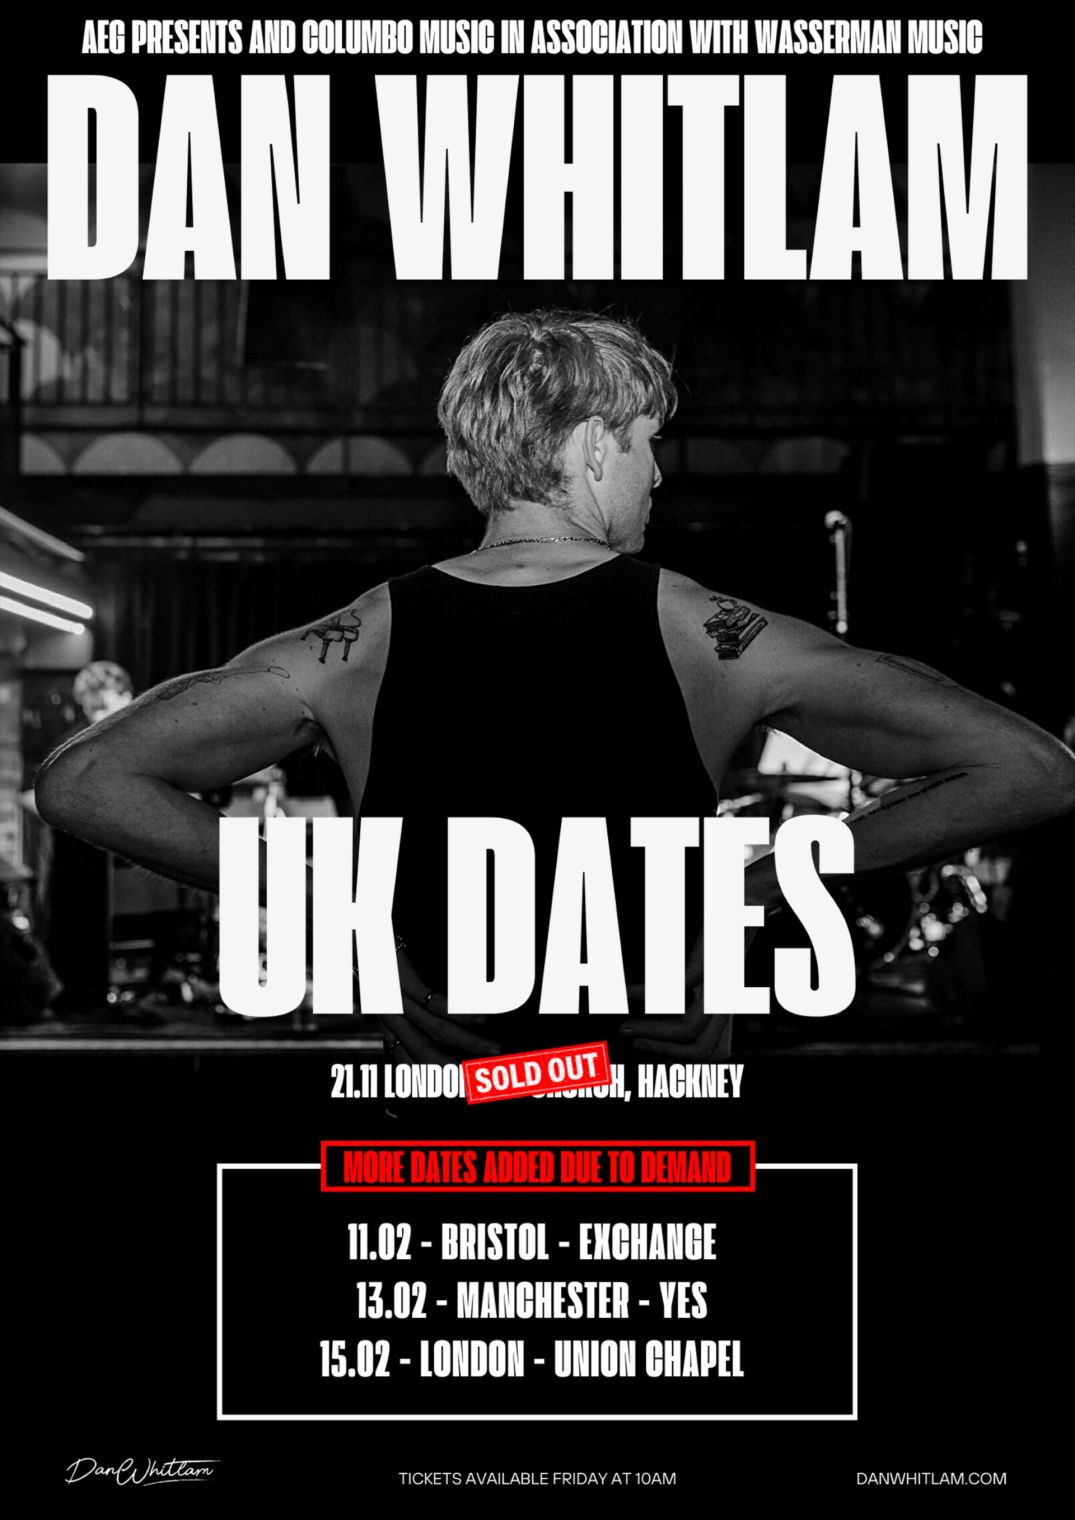 Multi-talented Dan Whitlam wraps up his sell-out UK tour at the Union Chapel in London tonight